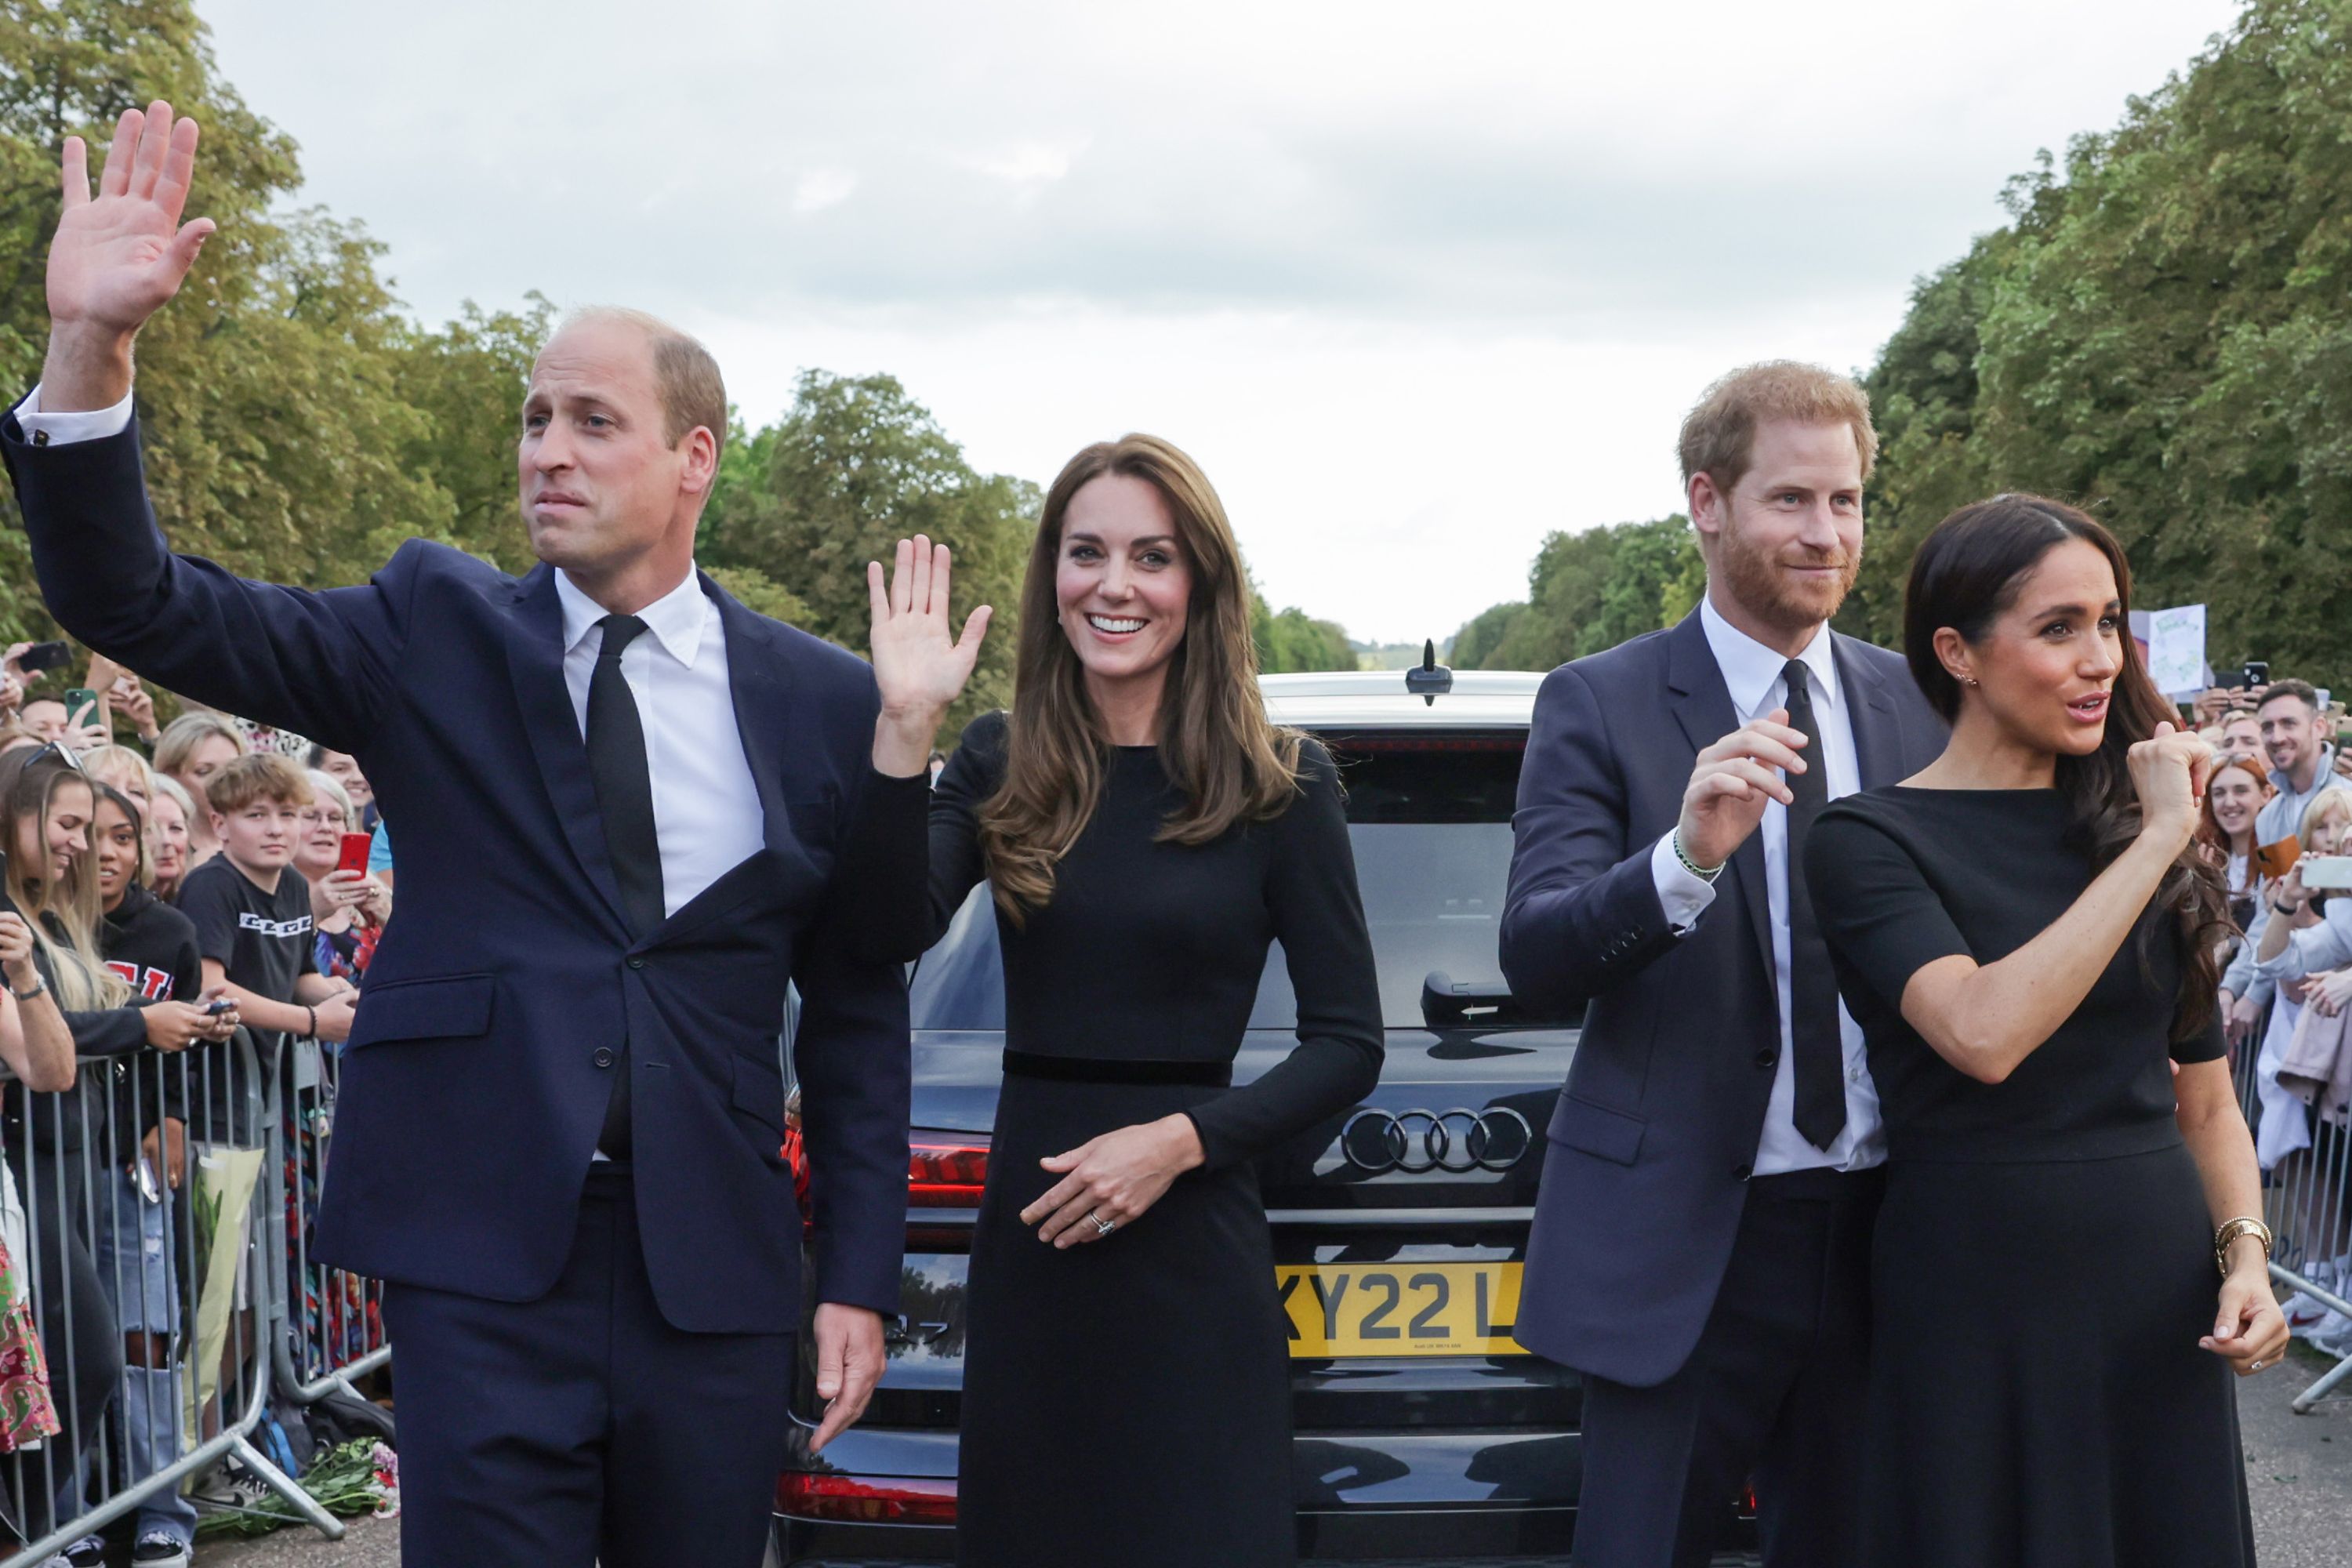 Prince Harry and William are More Famous in U.S. Than Kate and Meghan